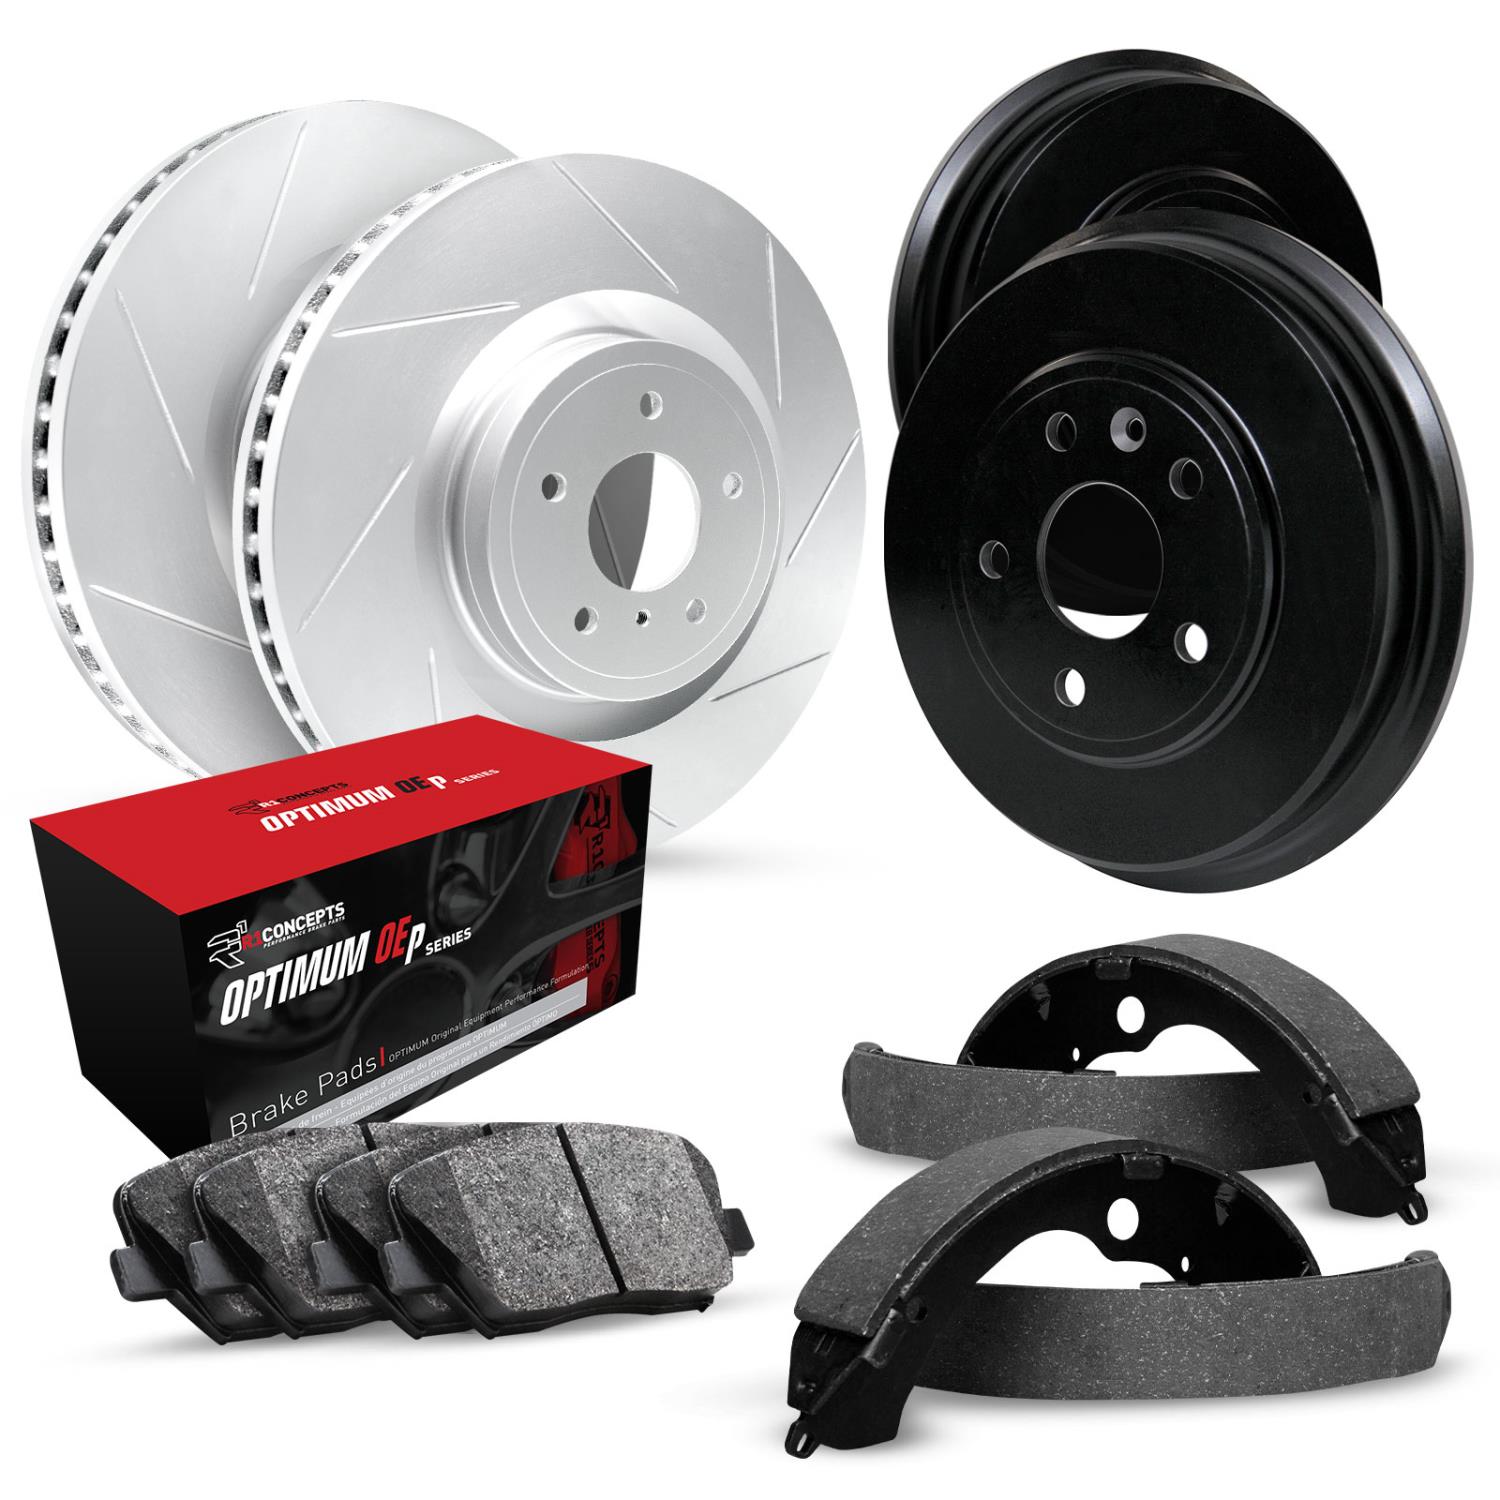 GEO-Carbon Slotted Brake Rotor & Drum Set w/Optimum OE Pads & Shoes, 1982-1983 Ford/Lincoln/Mercury/Mazda